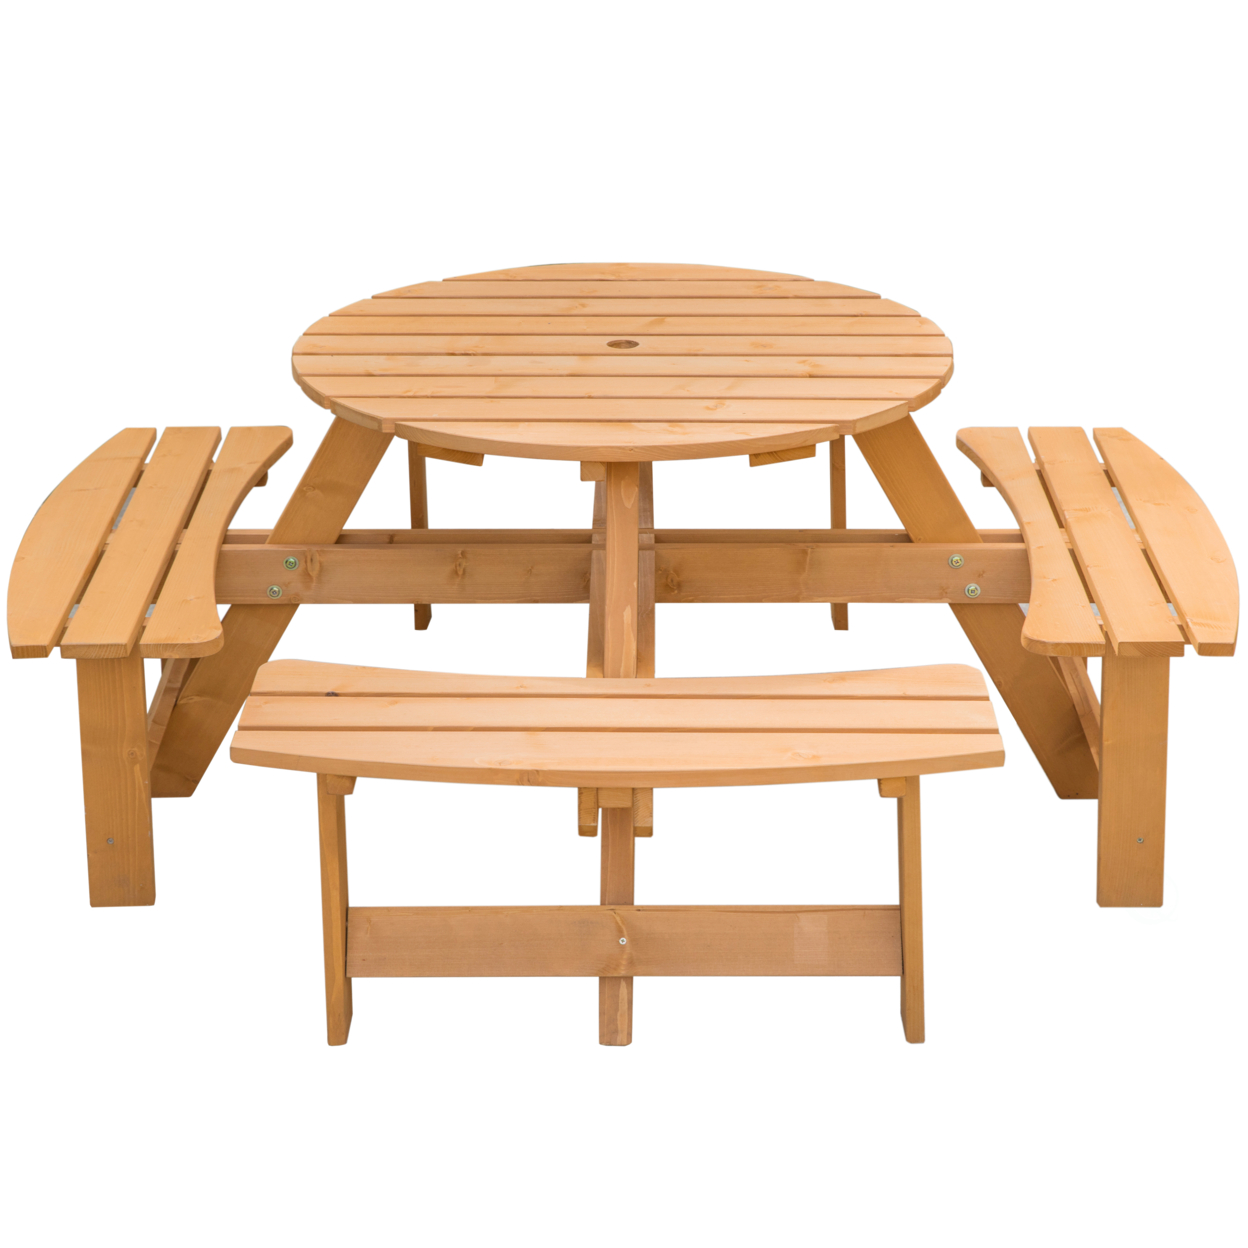 Wooden Outdoor Patio Garden Round Picnic Table with Bench, 8 Person - image 5 of 10